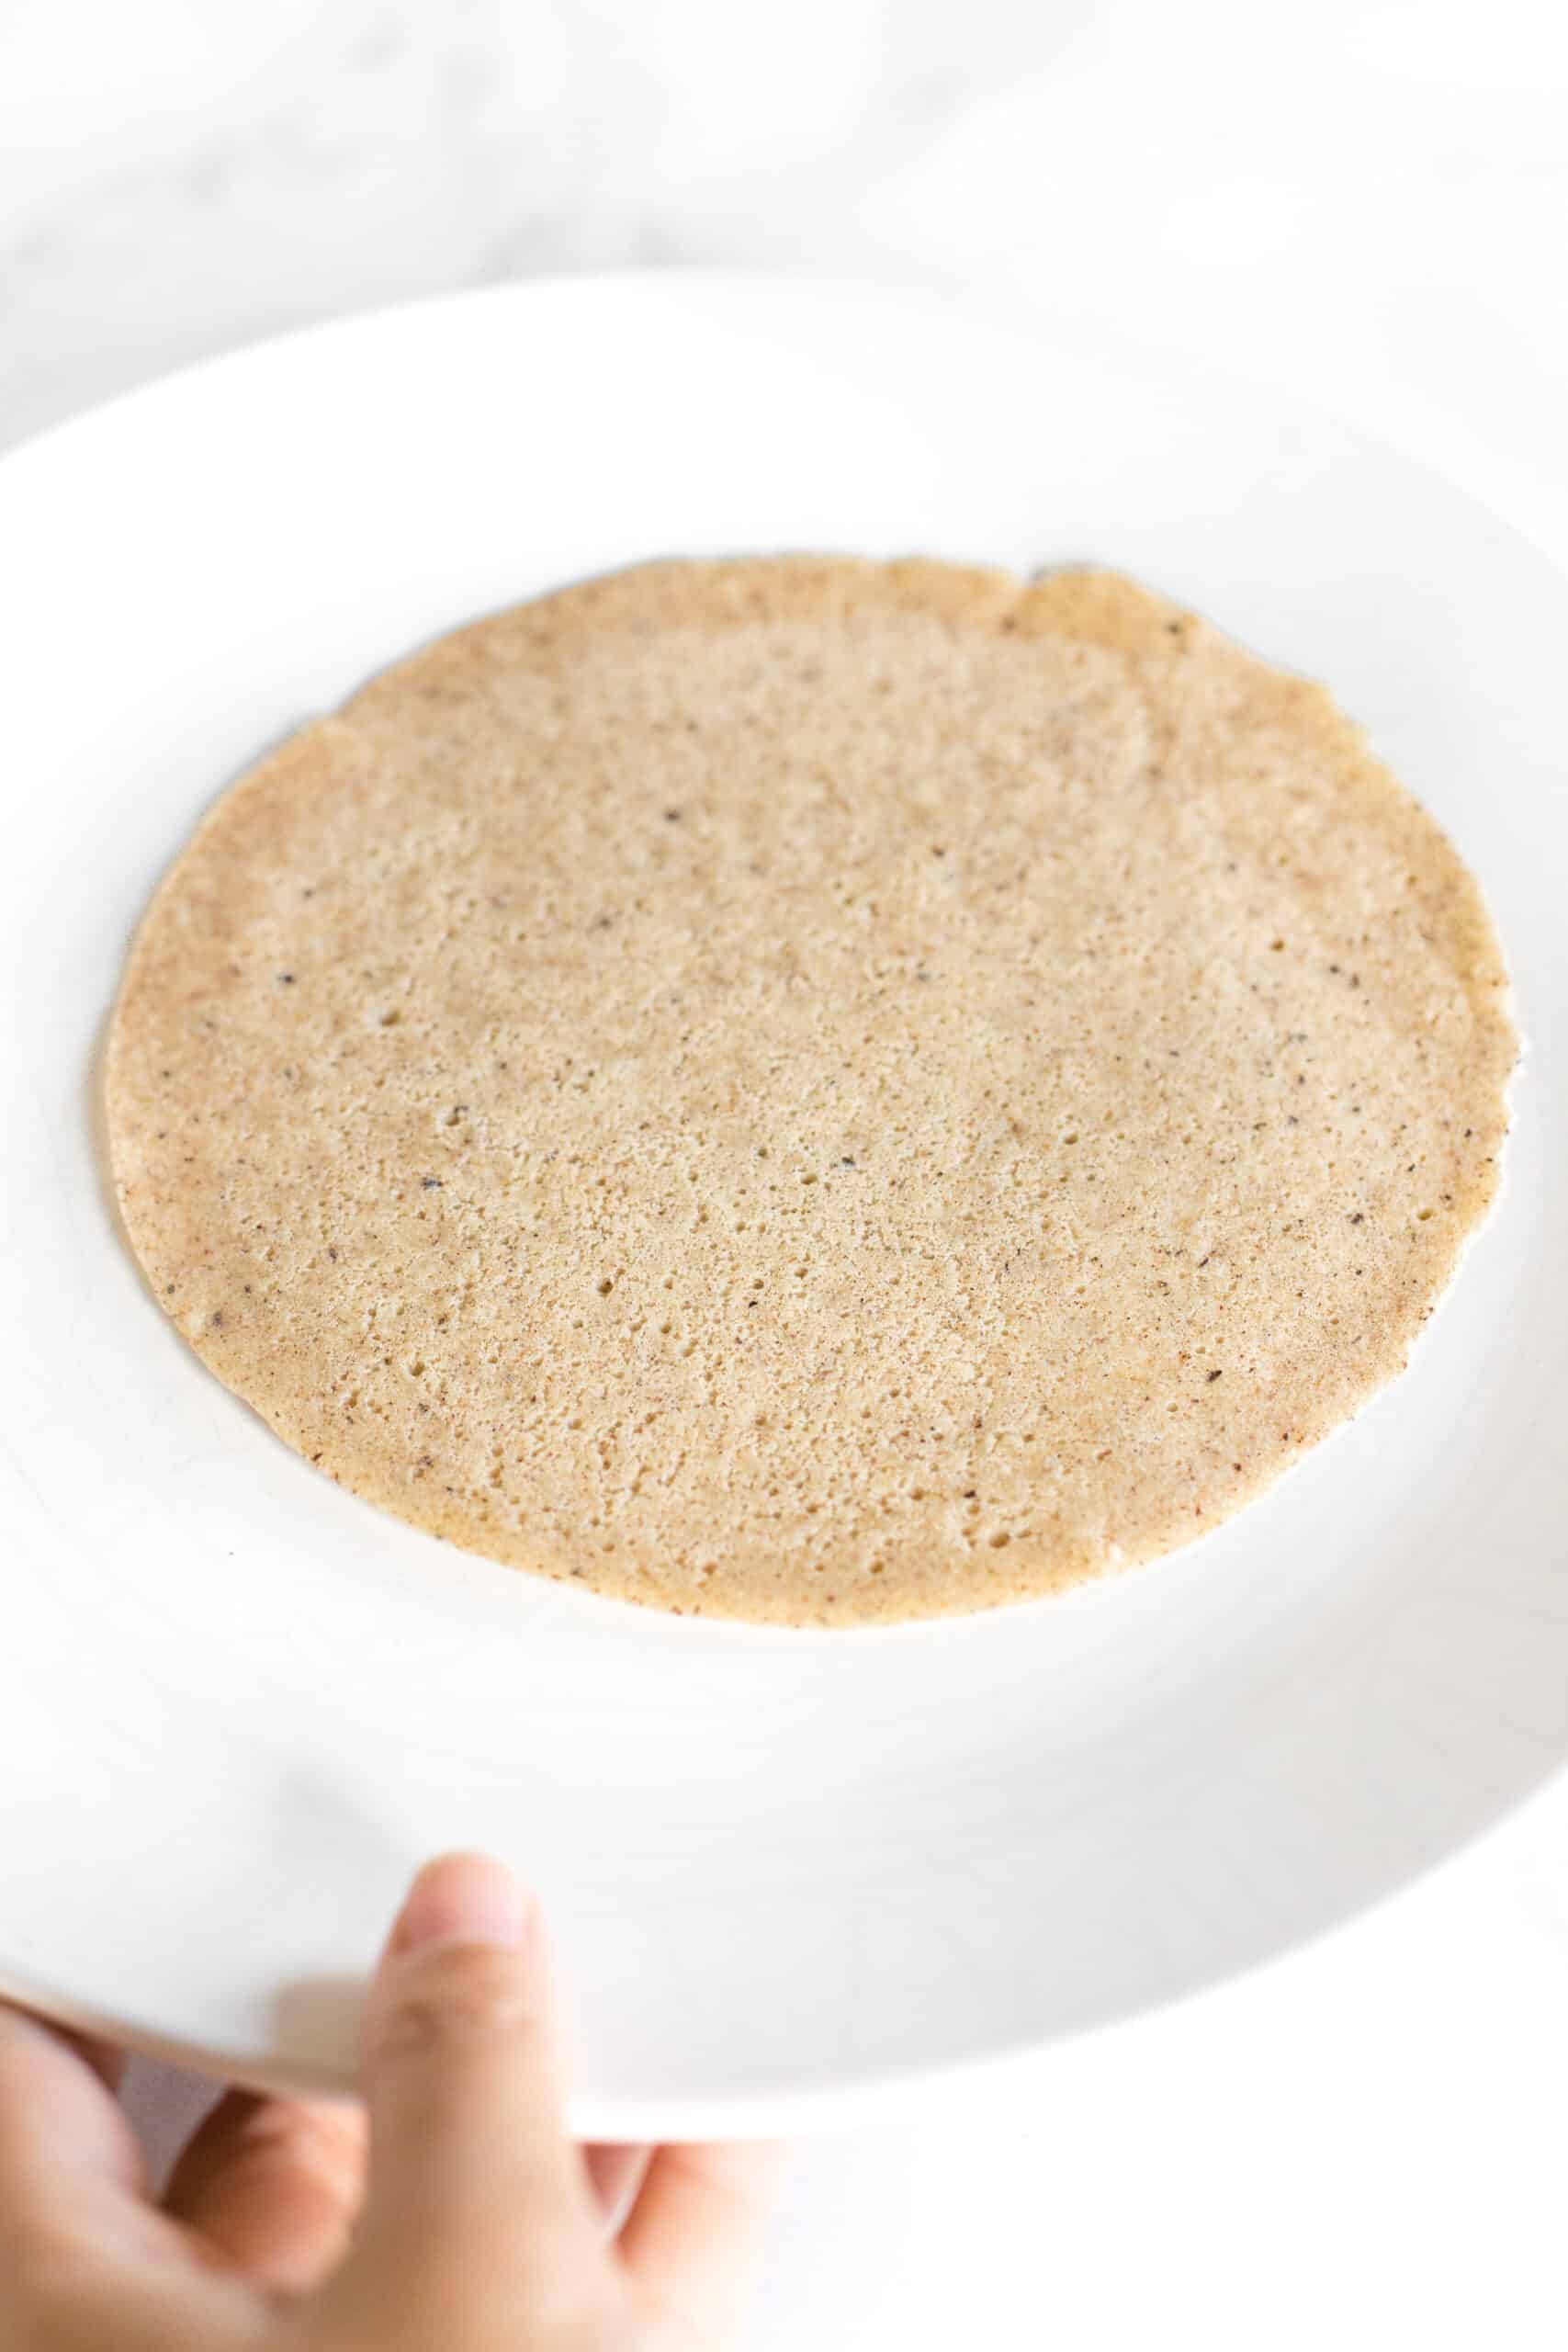 Holding a plate with a single buckwheat crepe.